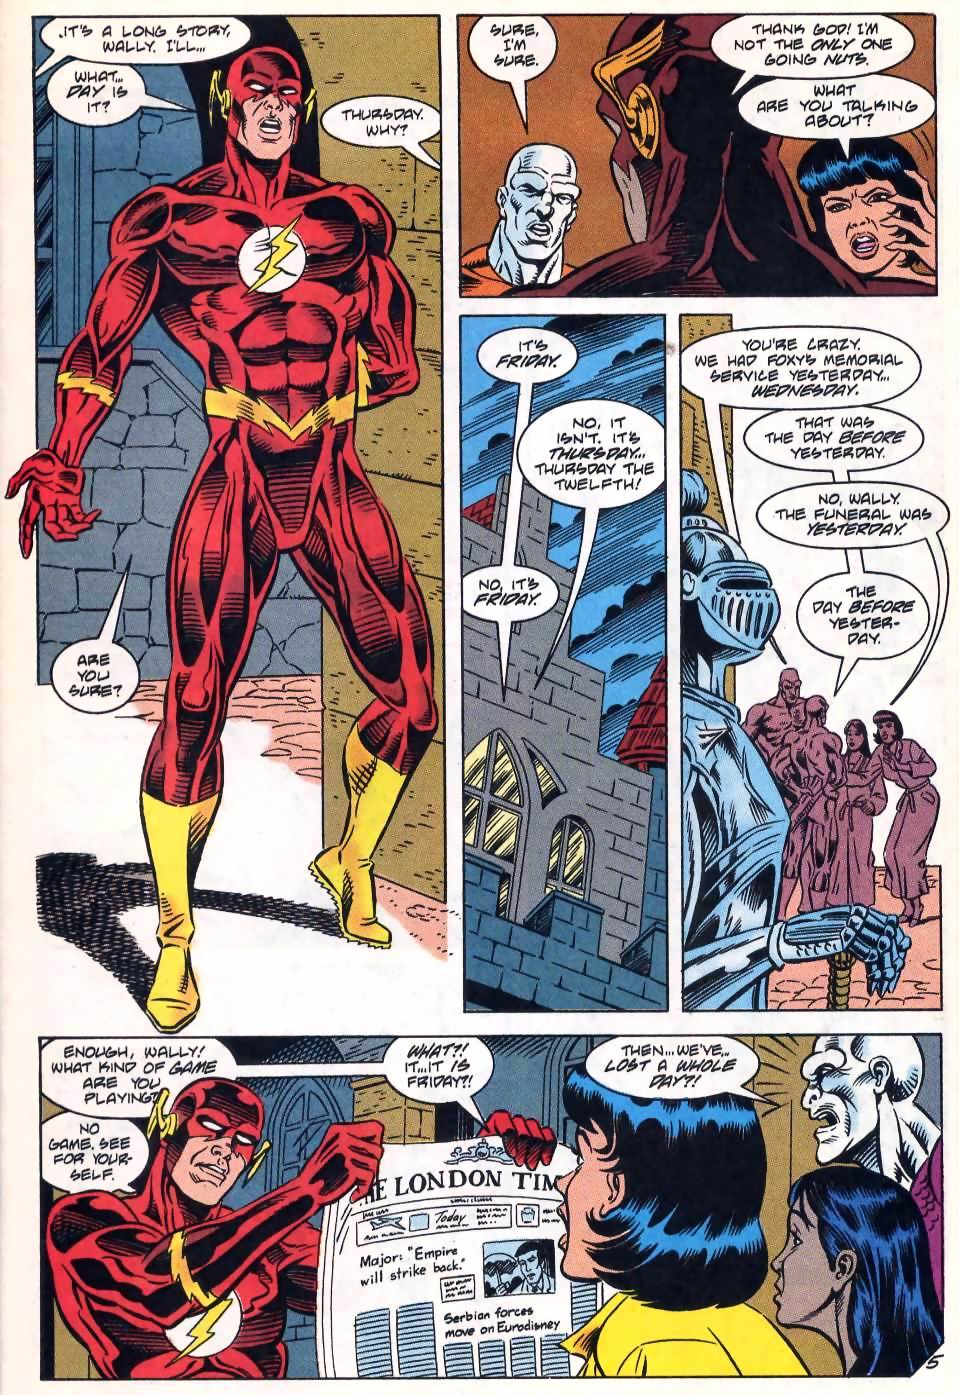 Justice League International (1993) 54 Page 5